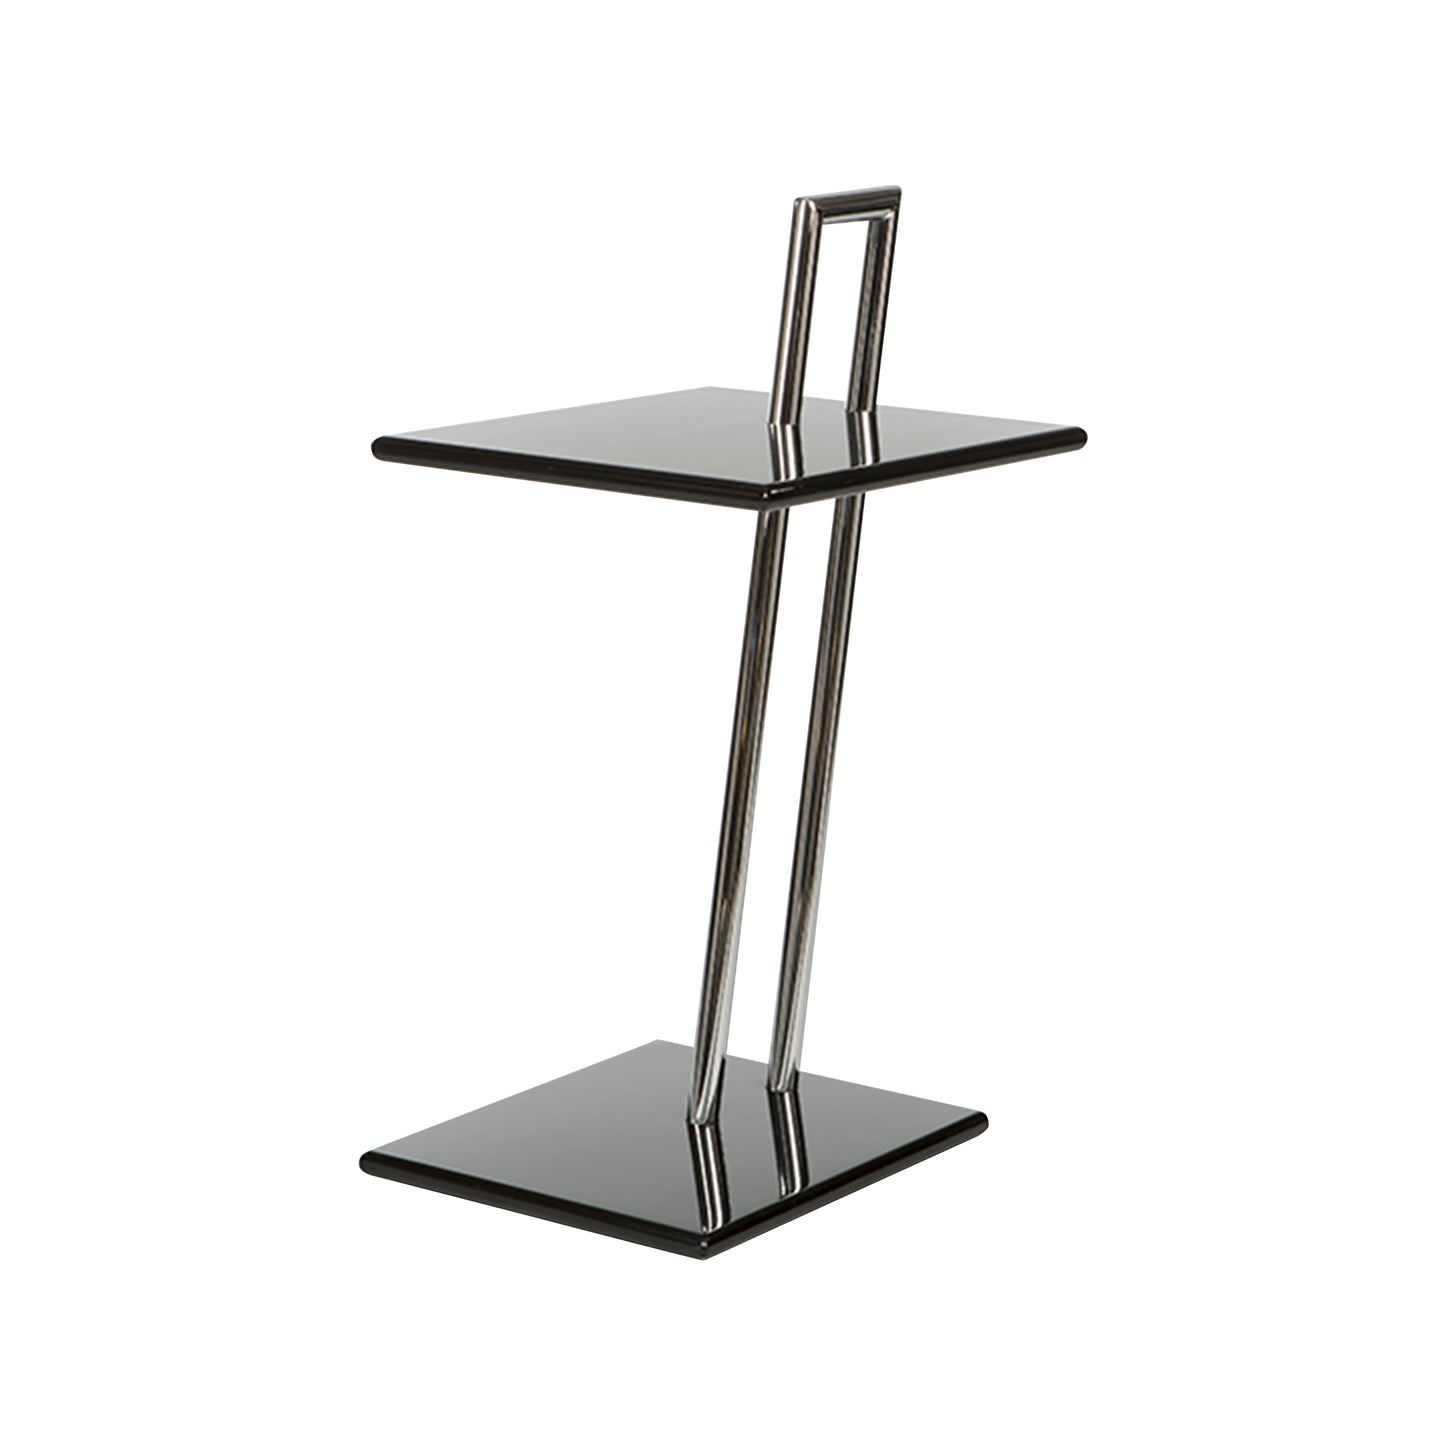 The occasional table square style | Black | Side